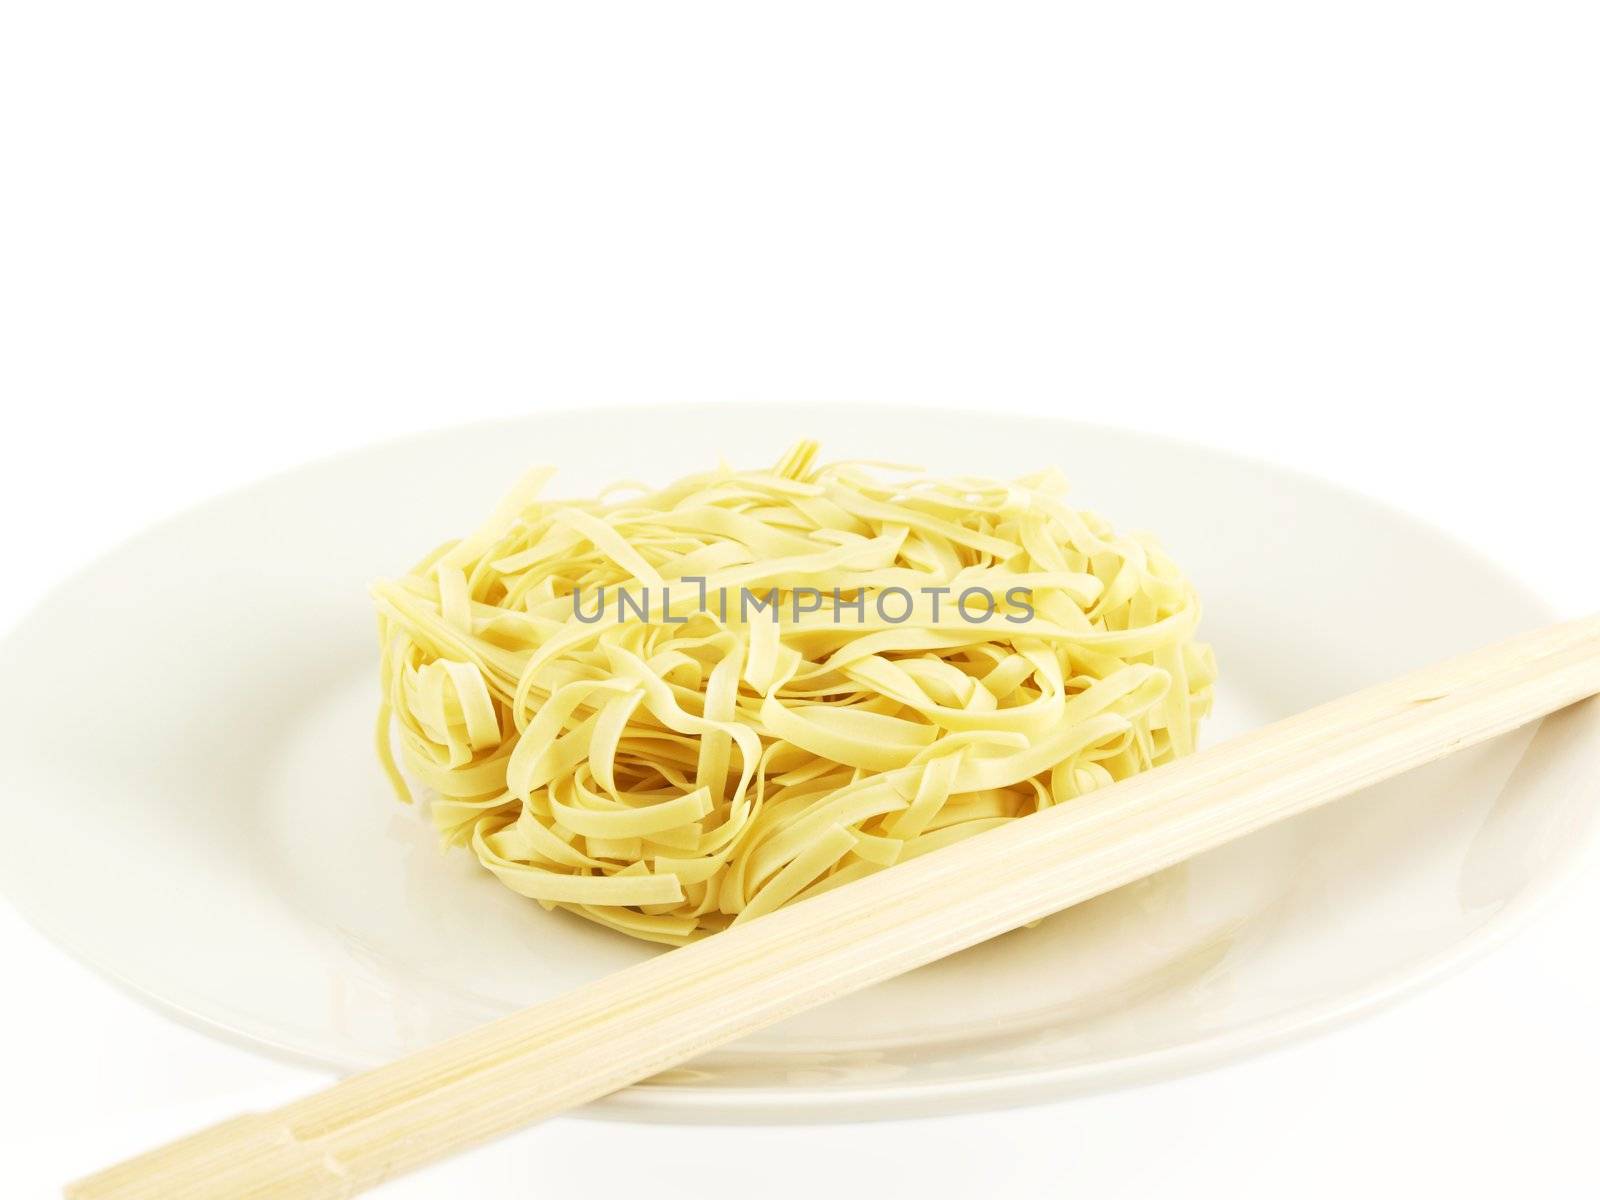 Dried uncoocked noodles, on white plate with chopsticks, isolated towards white background